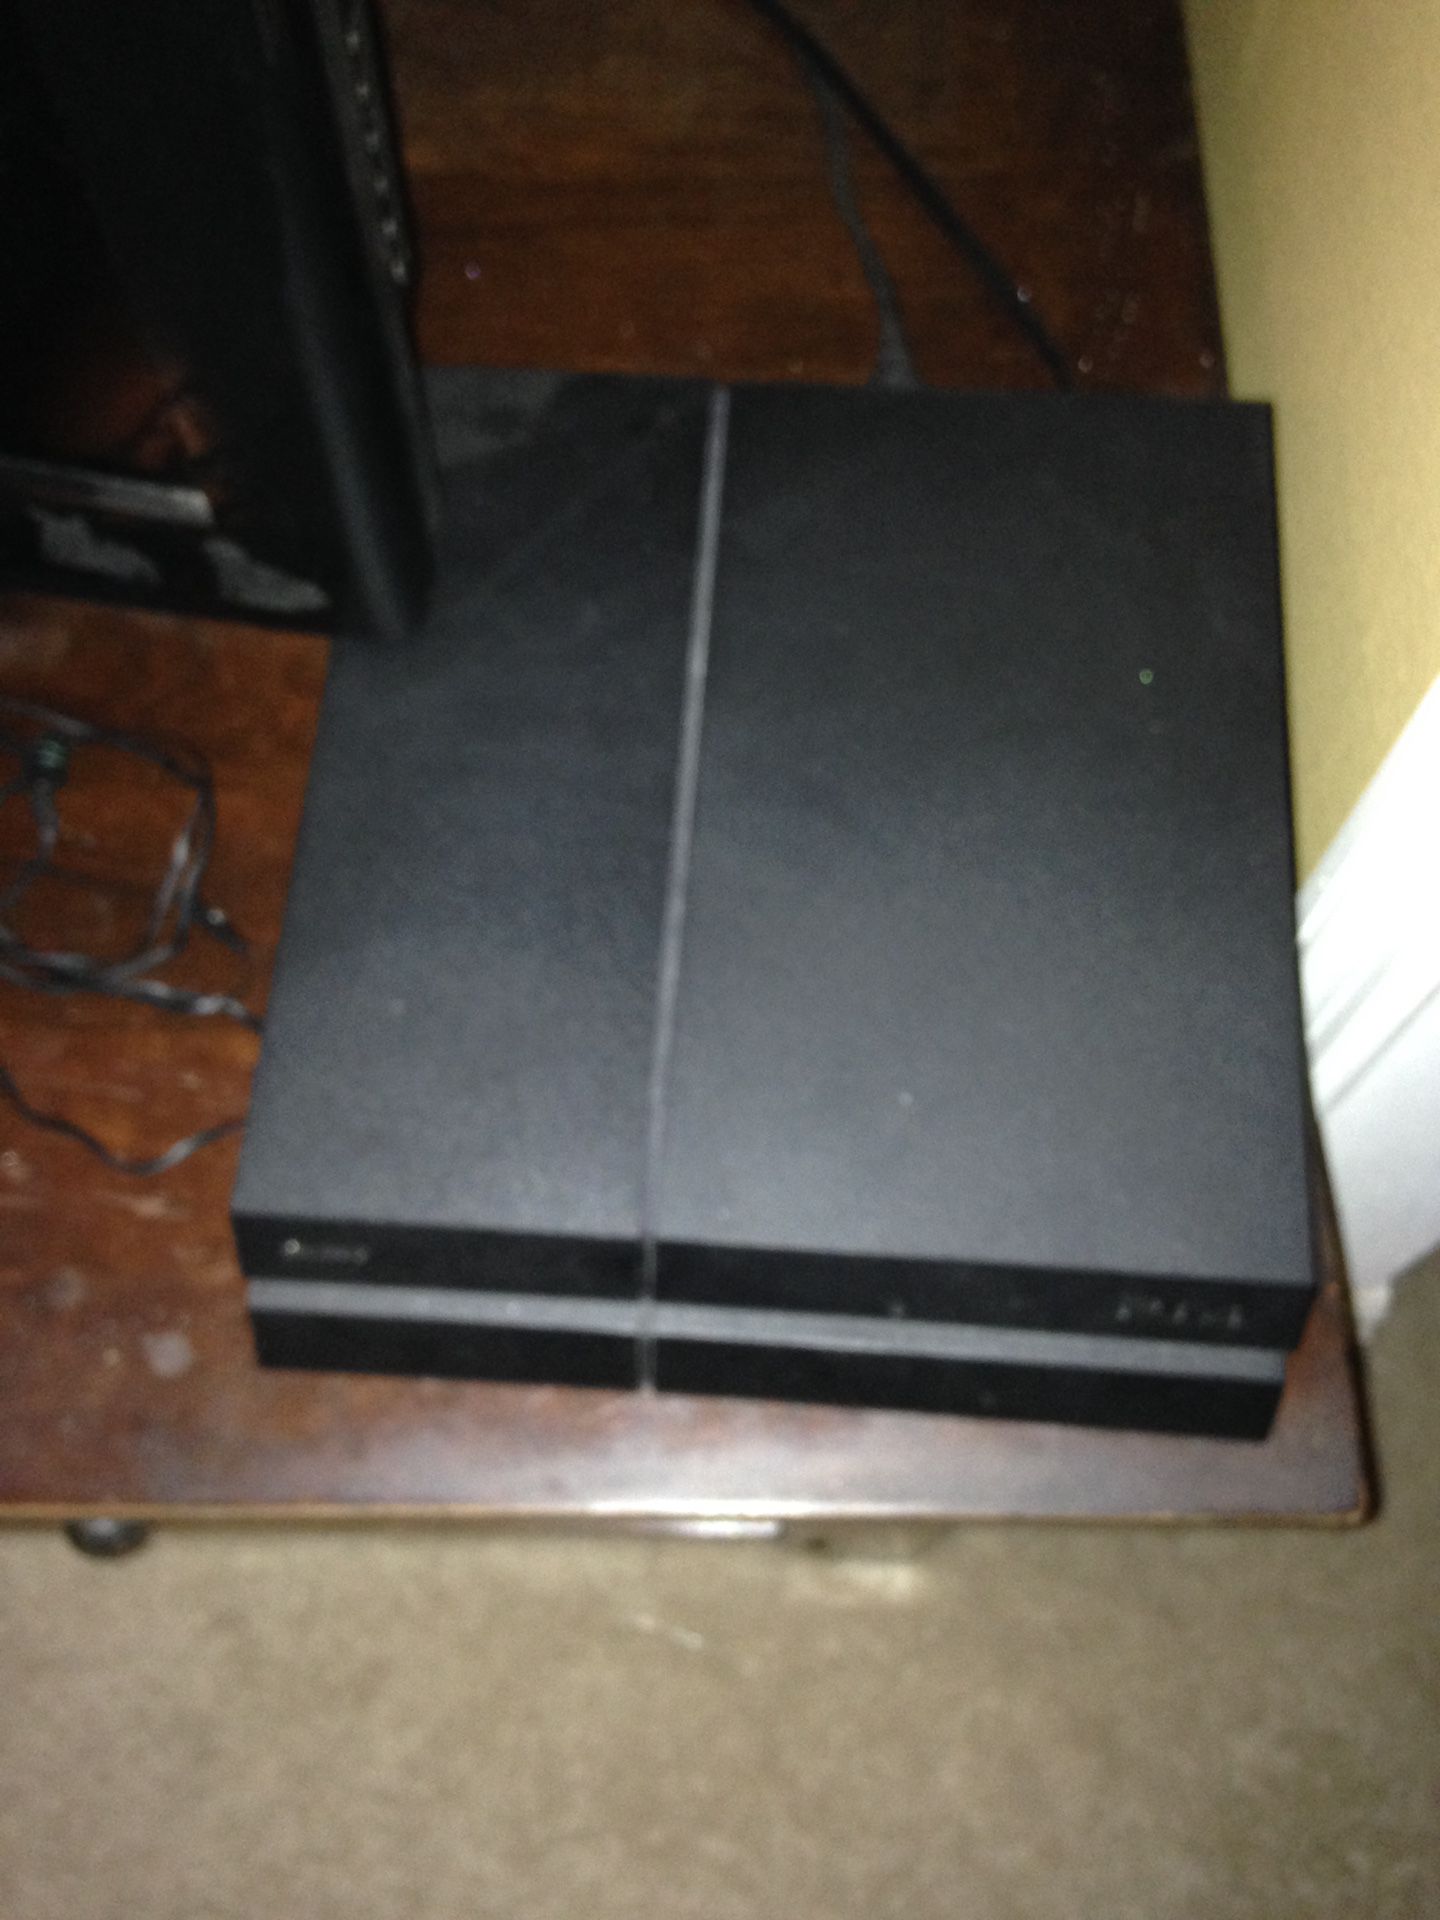 Ps4 (Has account with many games and no controller)